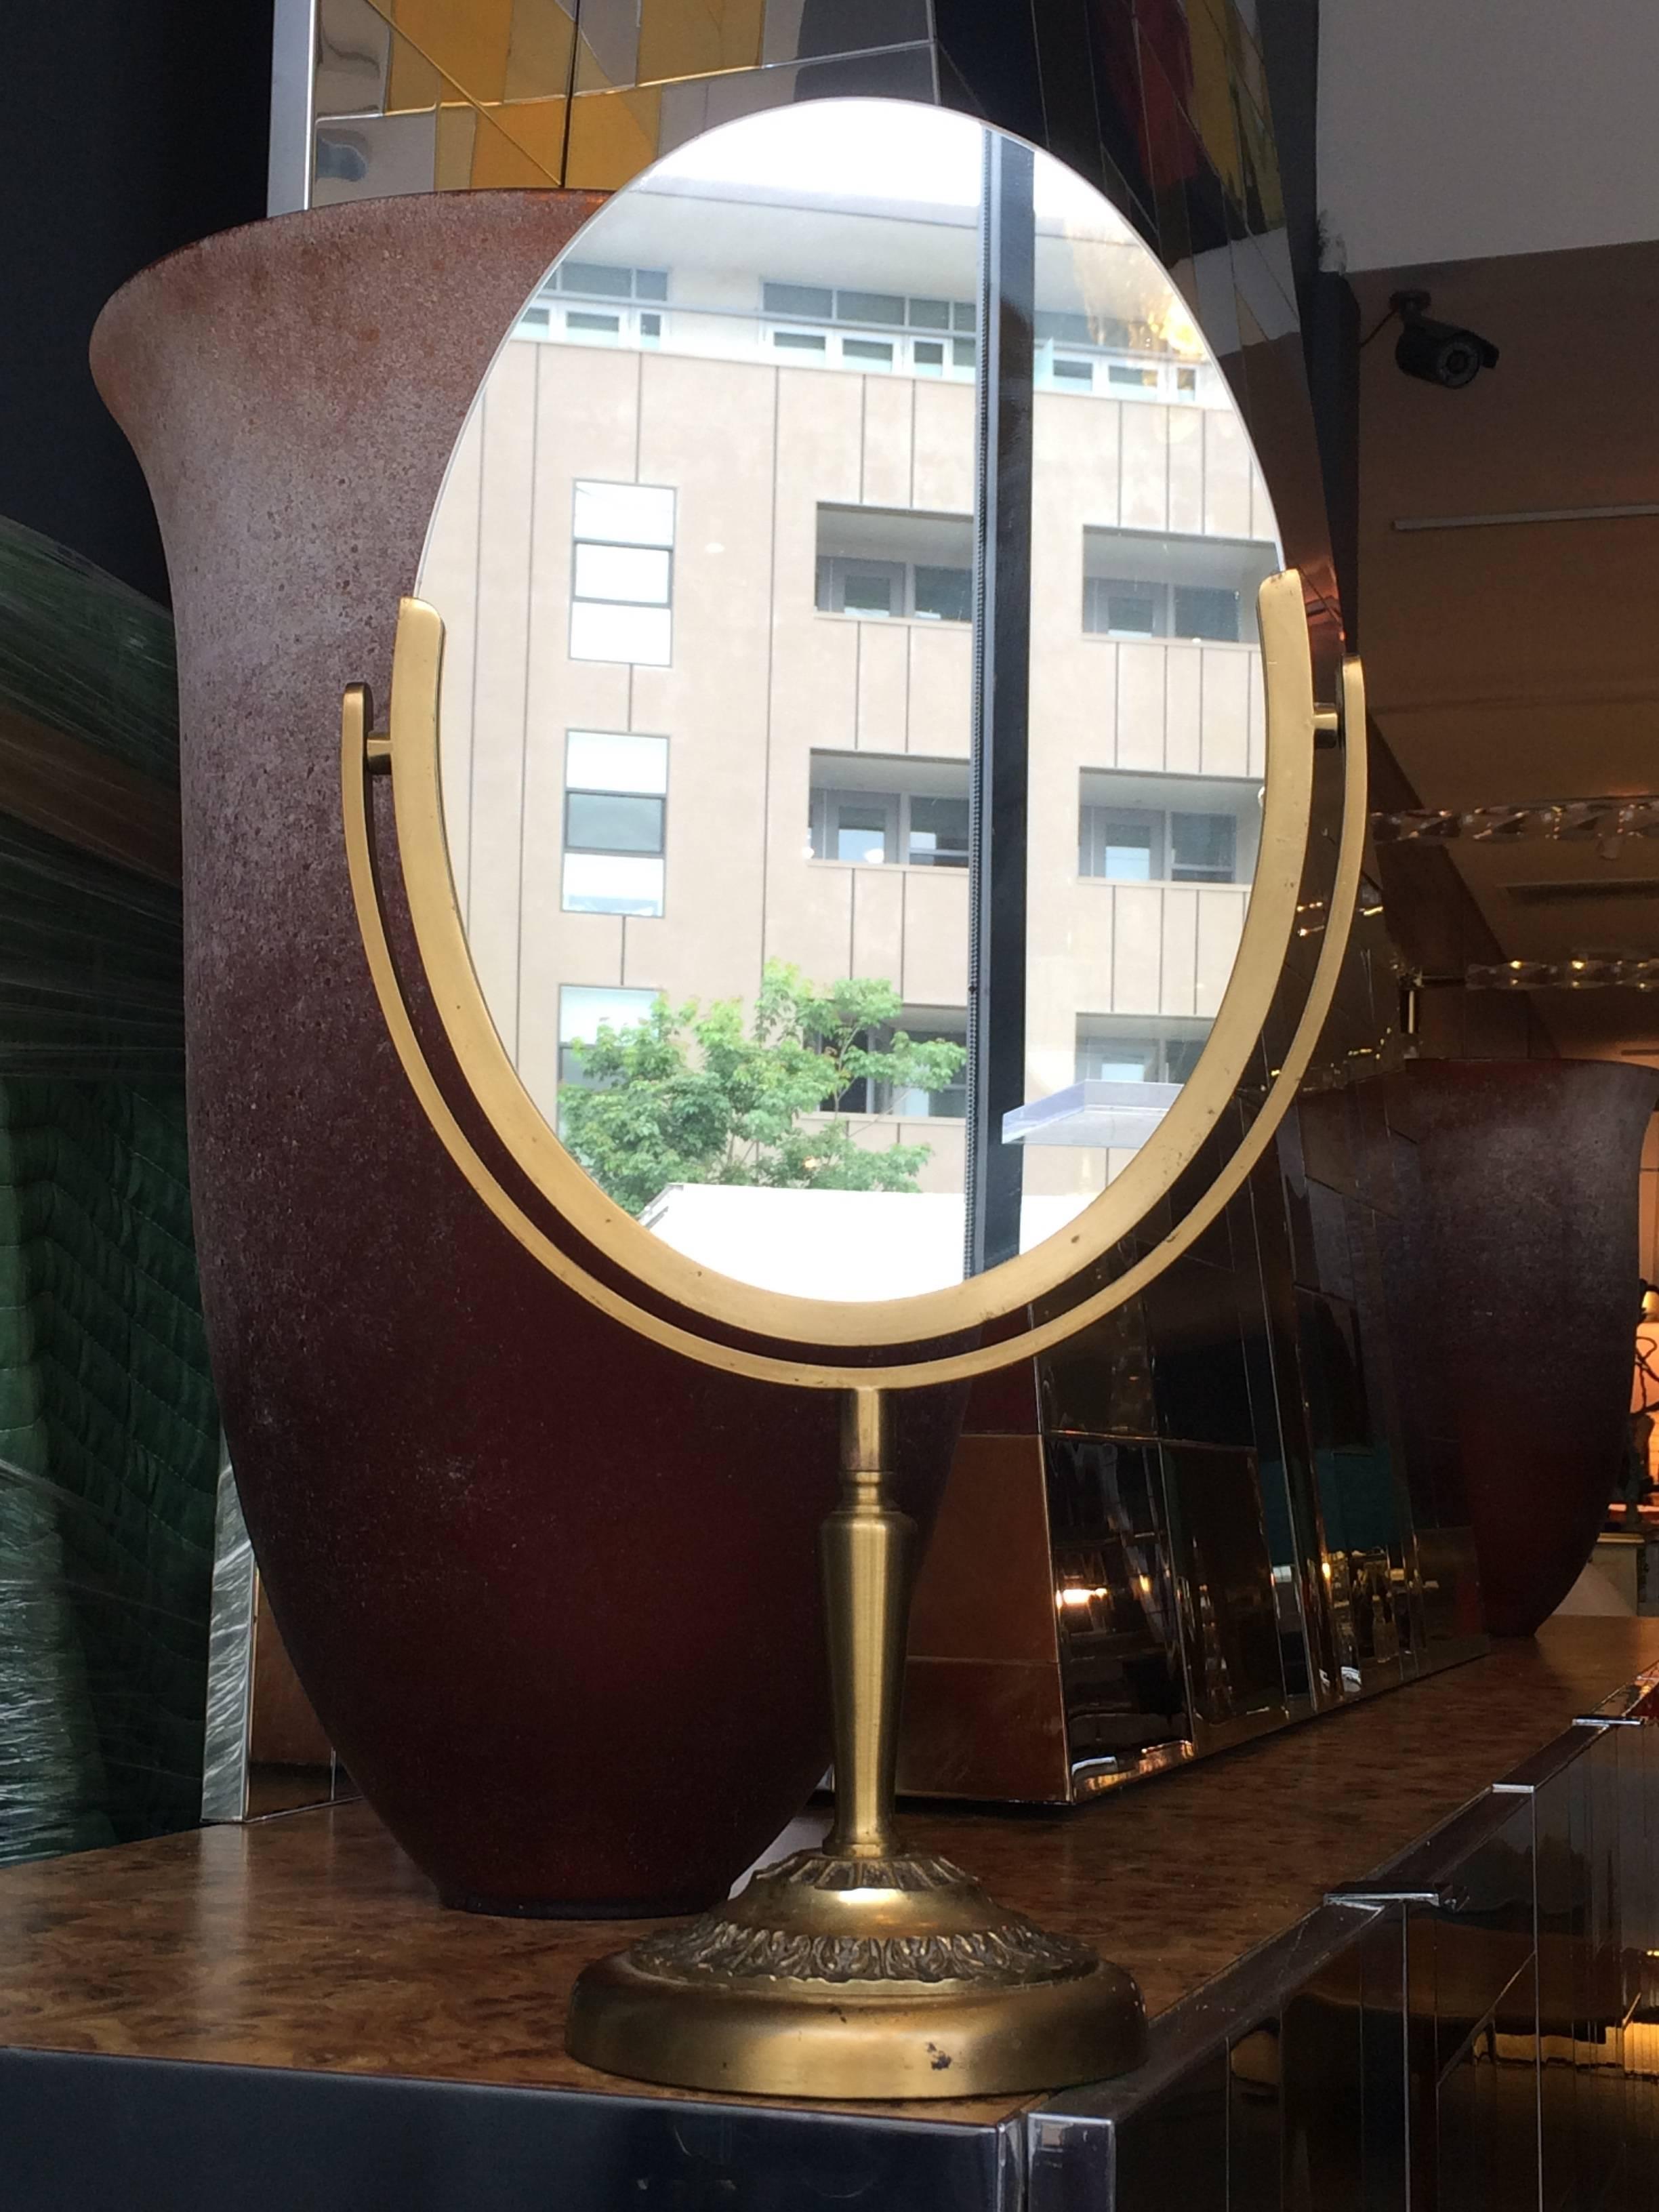 Beautiful oval mirror designed and manufactured by Charles Hollis Jones in the 1960s. The mirror has an antique brass finished frame and base, the mirror is double sided and it can be flipped to be used on either side.
The piece is signed by the